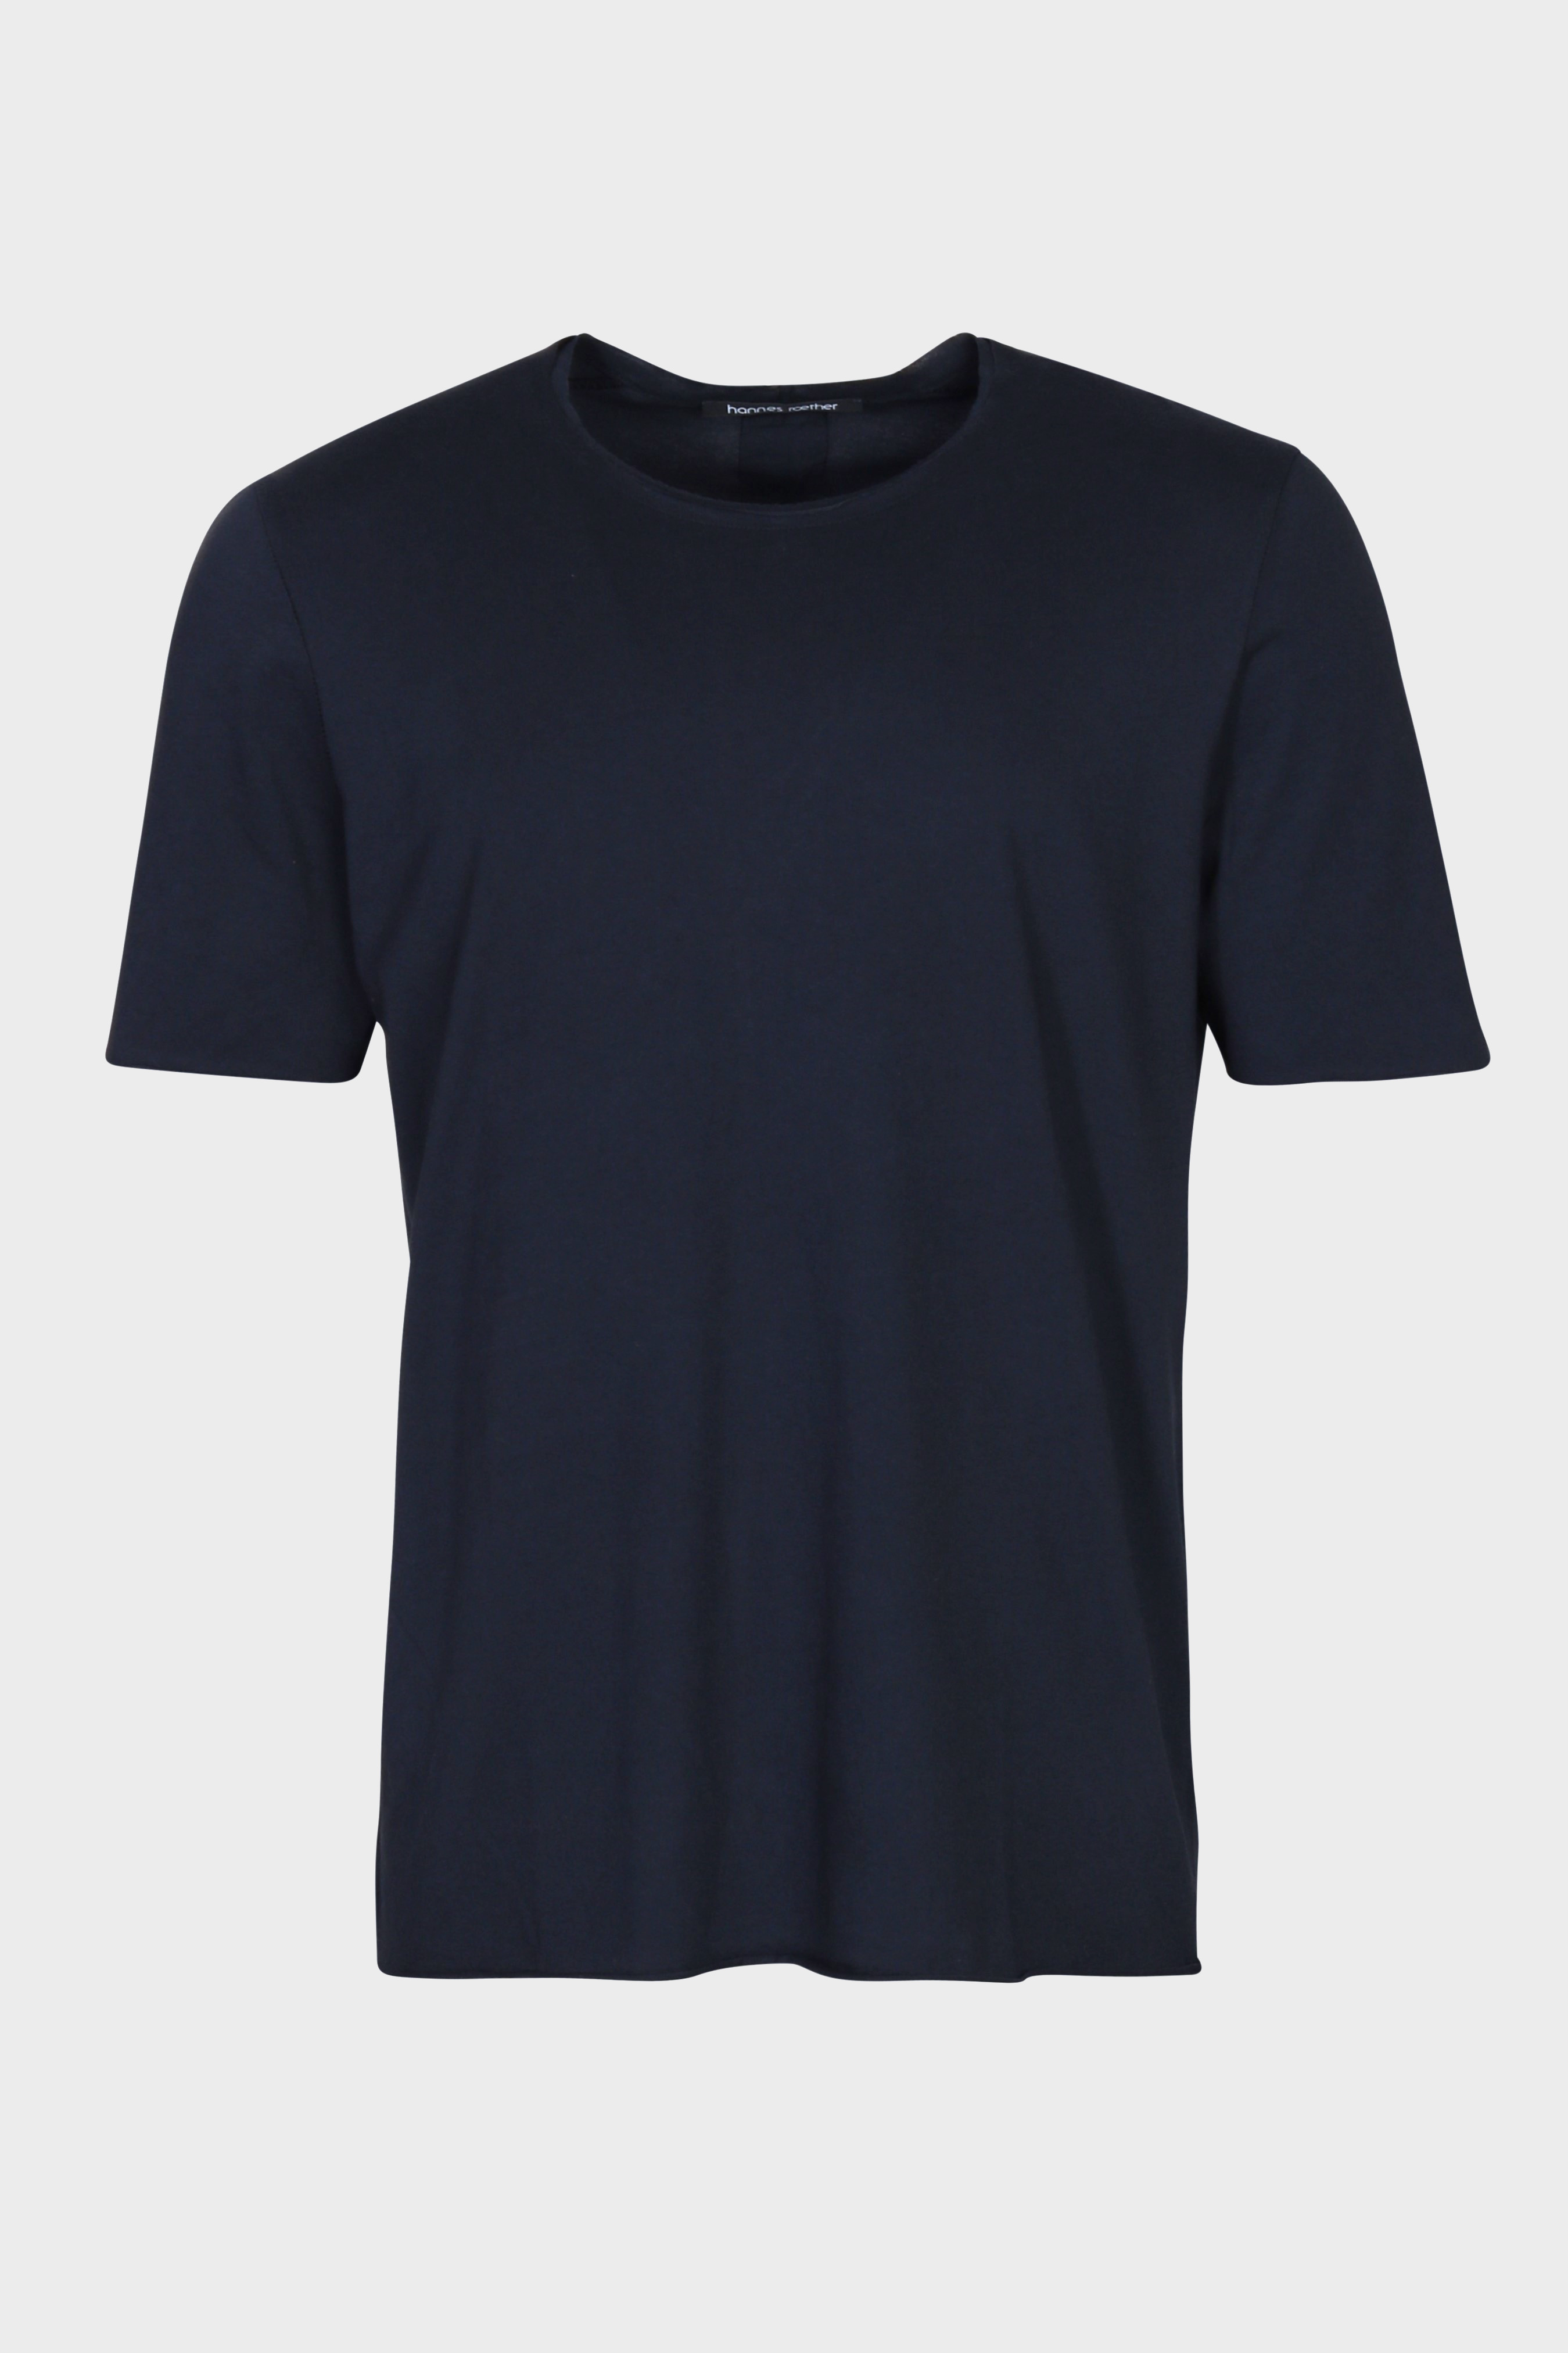 HANNES ROETHER T-Shirt in Navy S